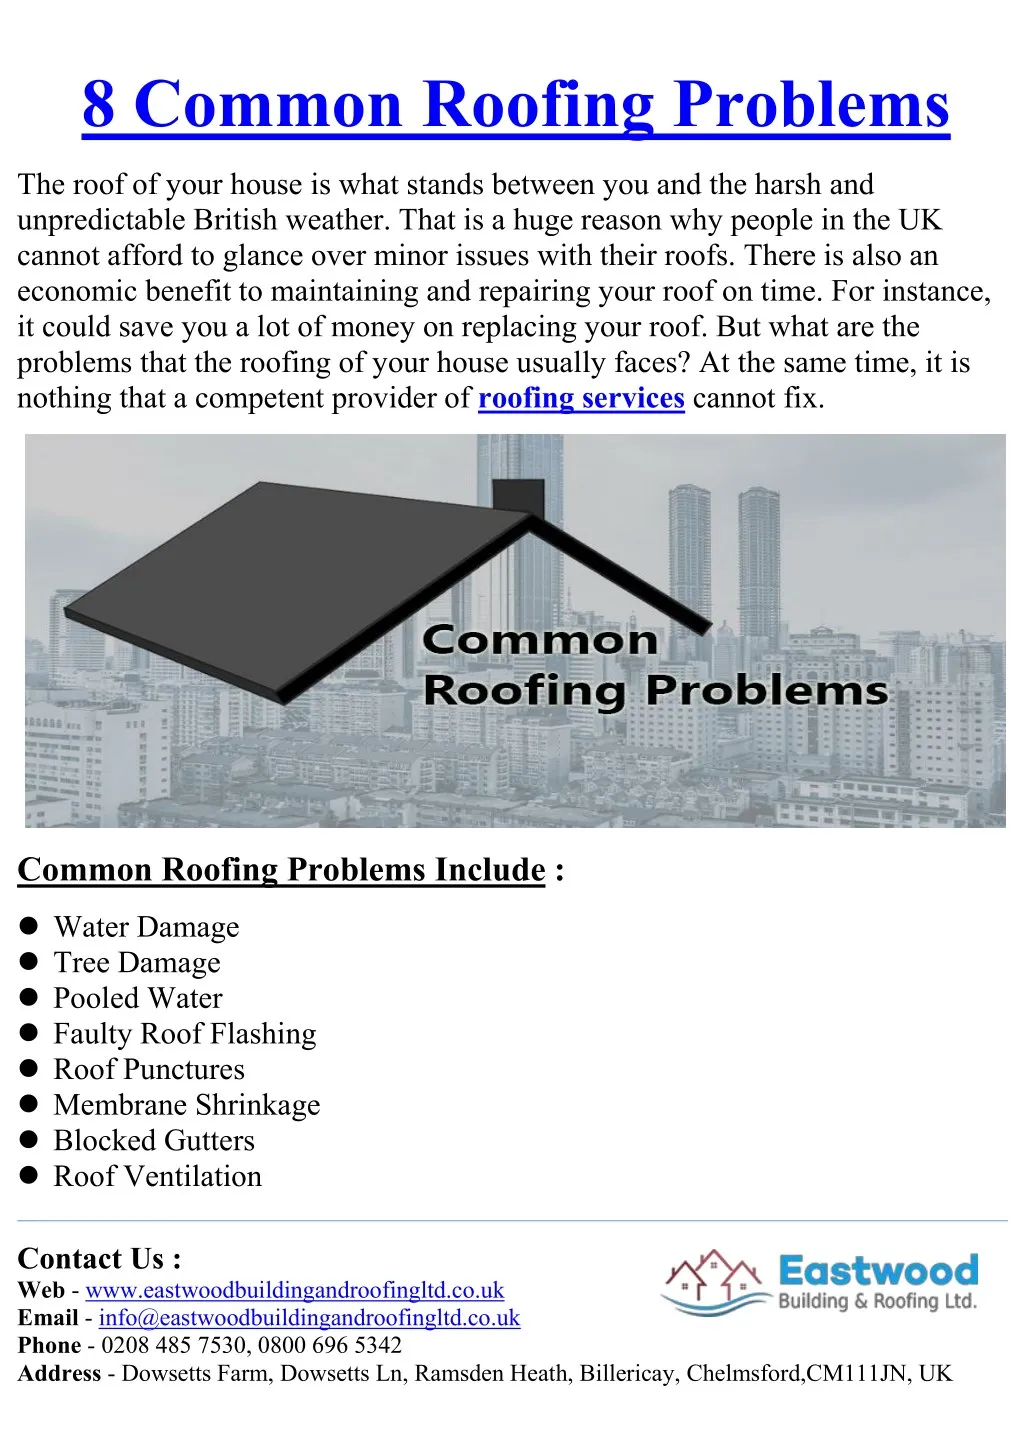 8 common roofing problems